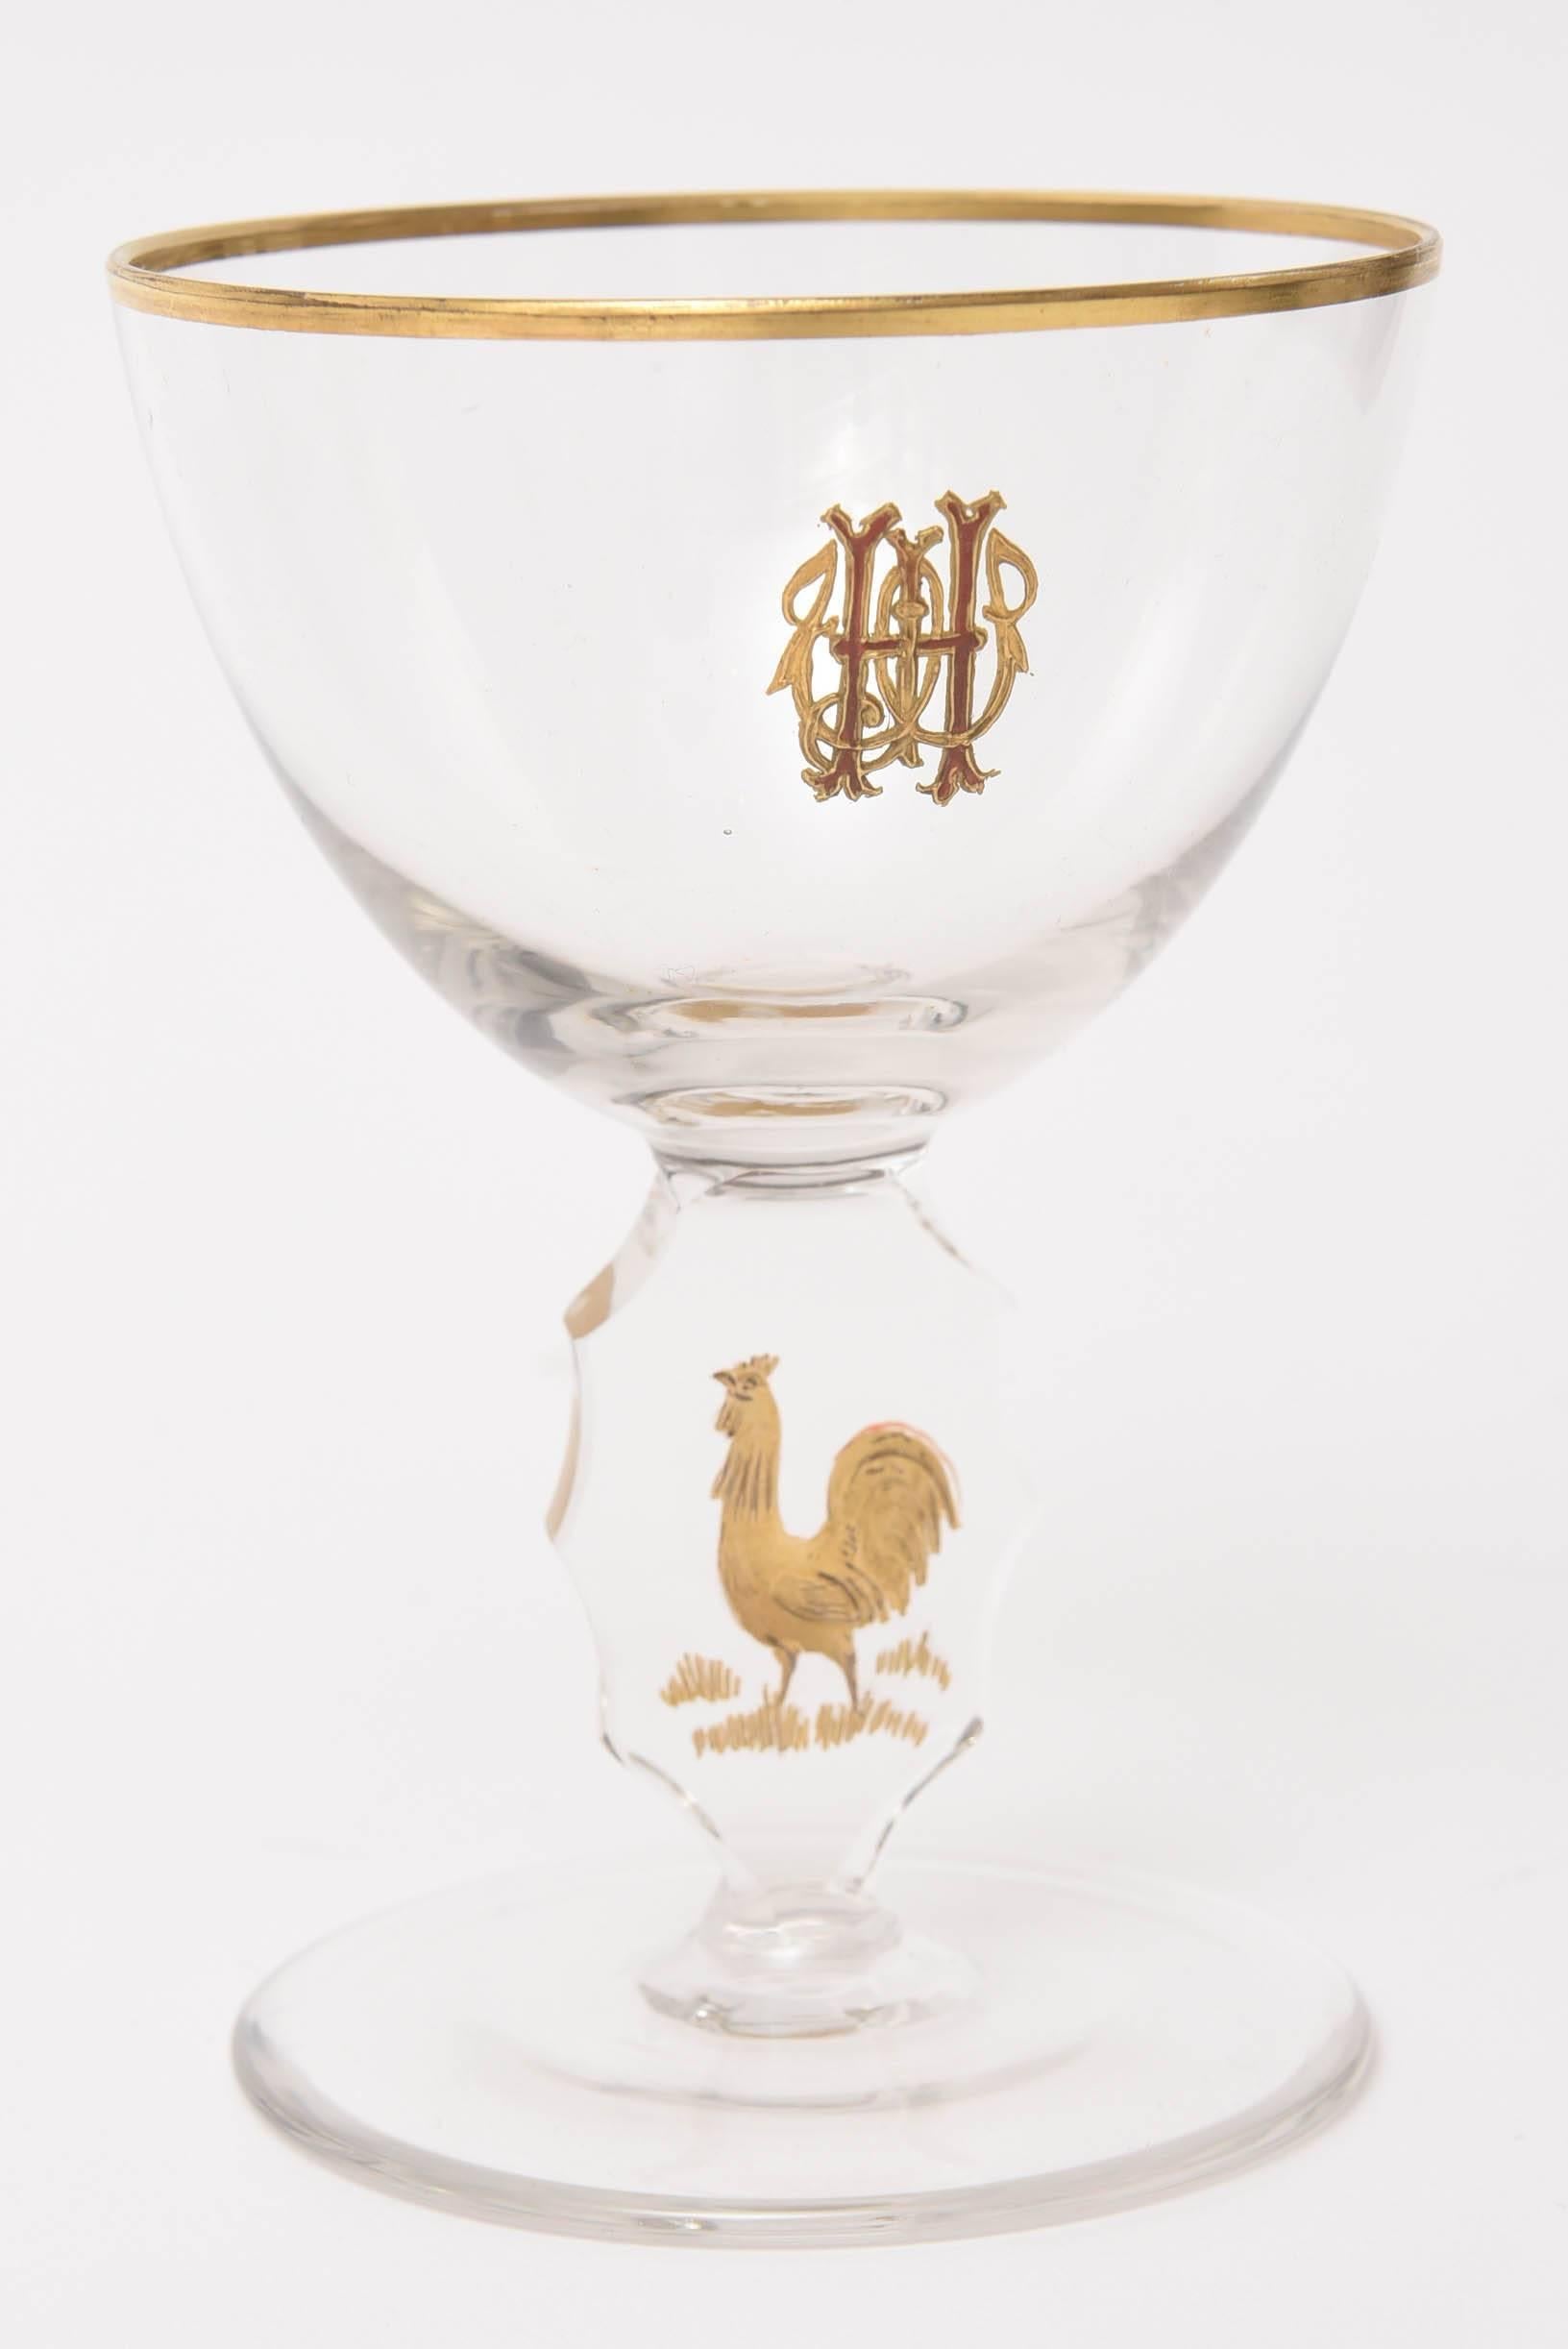 Hand-Crafted Set of 15 Cocktail Glasses, Gilded Rooster with Cut Stem and Raised Monogram